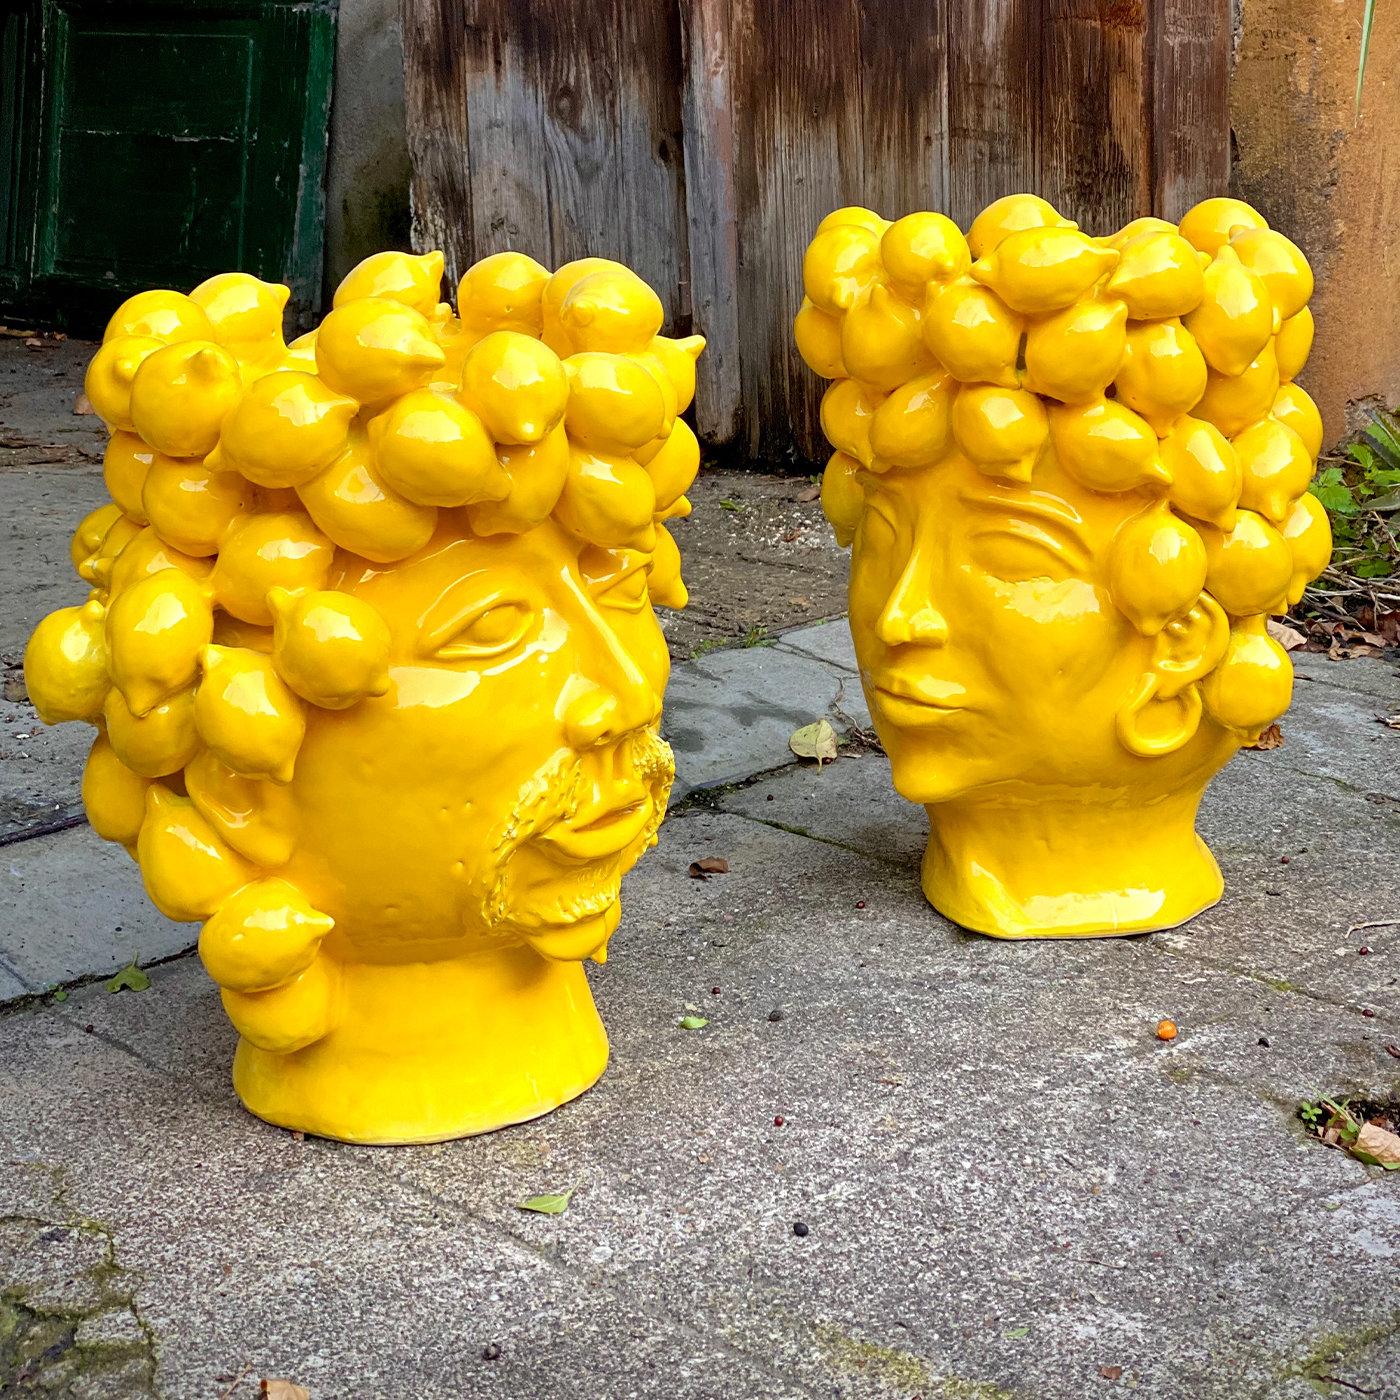 Ideal to be paired with its male counterpart for a cohesive look and increased chromatic vibrancy, this stylish ceramic head fully glazed in bright yellow represents the queen of country of lemons, an homage to Sicily and its expanses of citrus